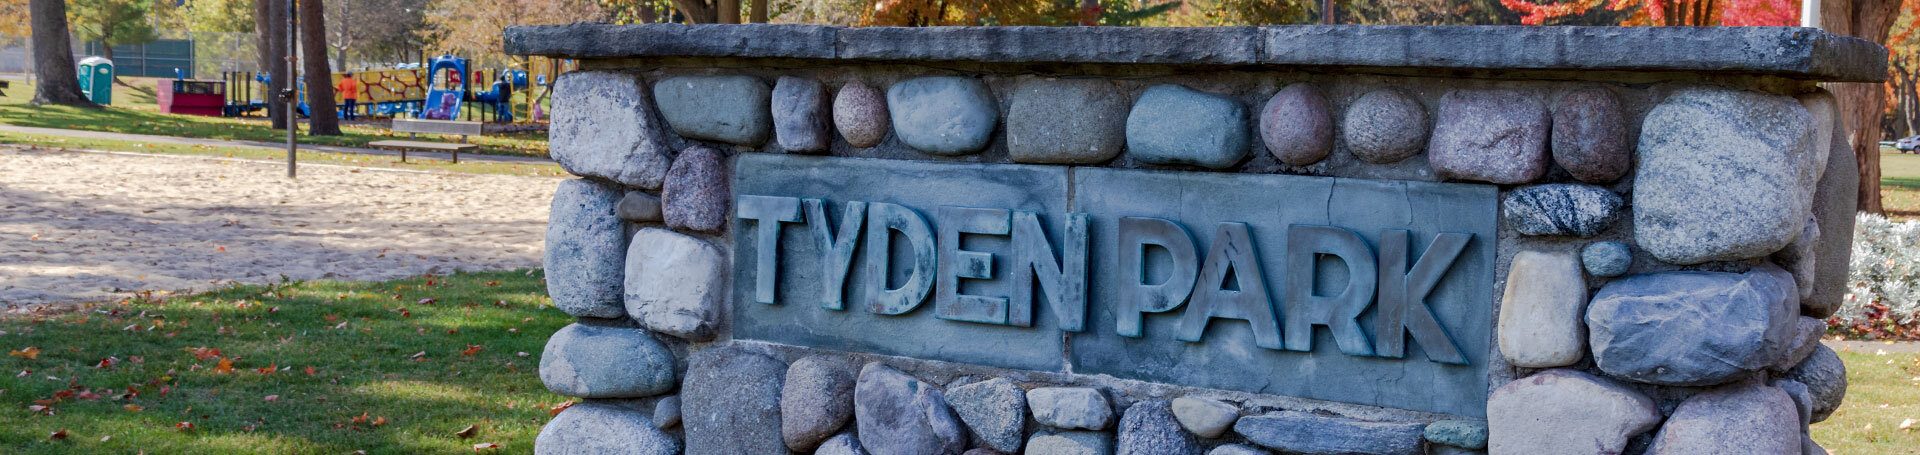 This is an image of the Tyden Park sign in Hastings.